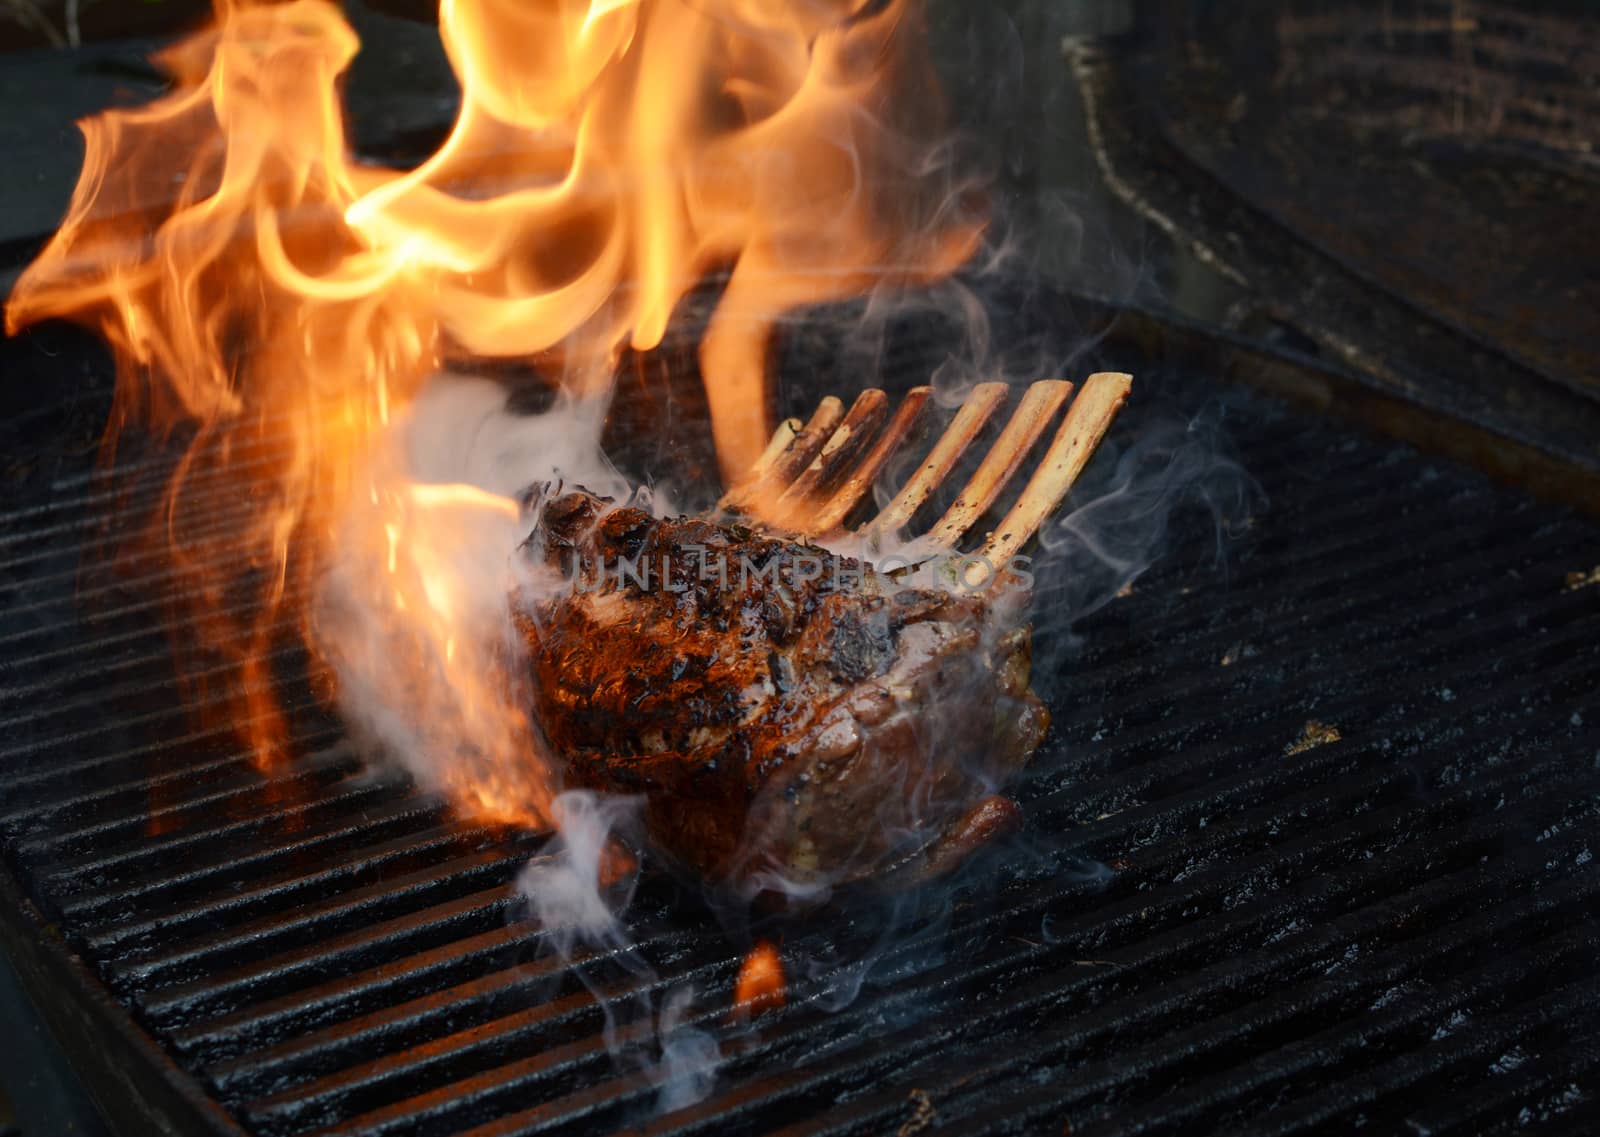 Tender rack of lamb being grilled, with large flames and smoke rising from the barbecue